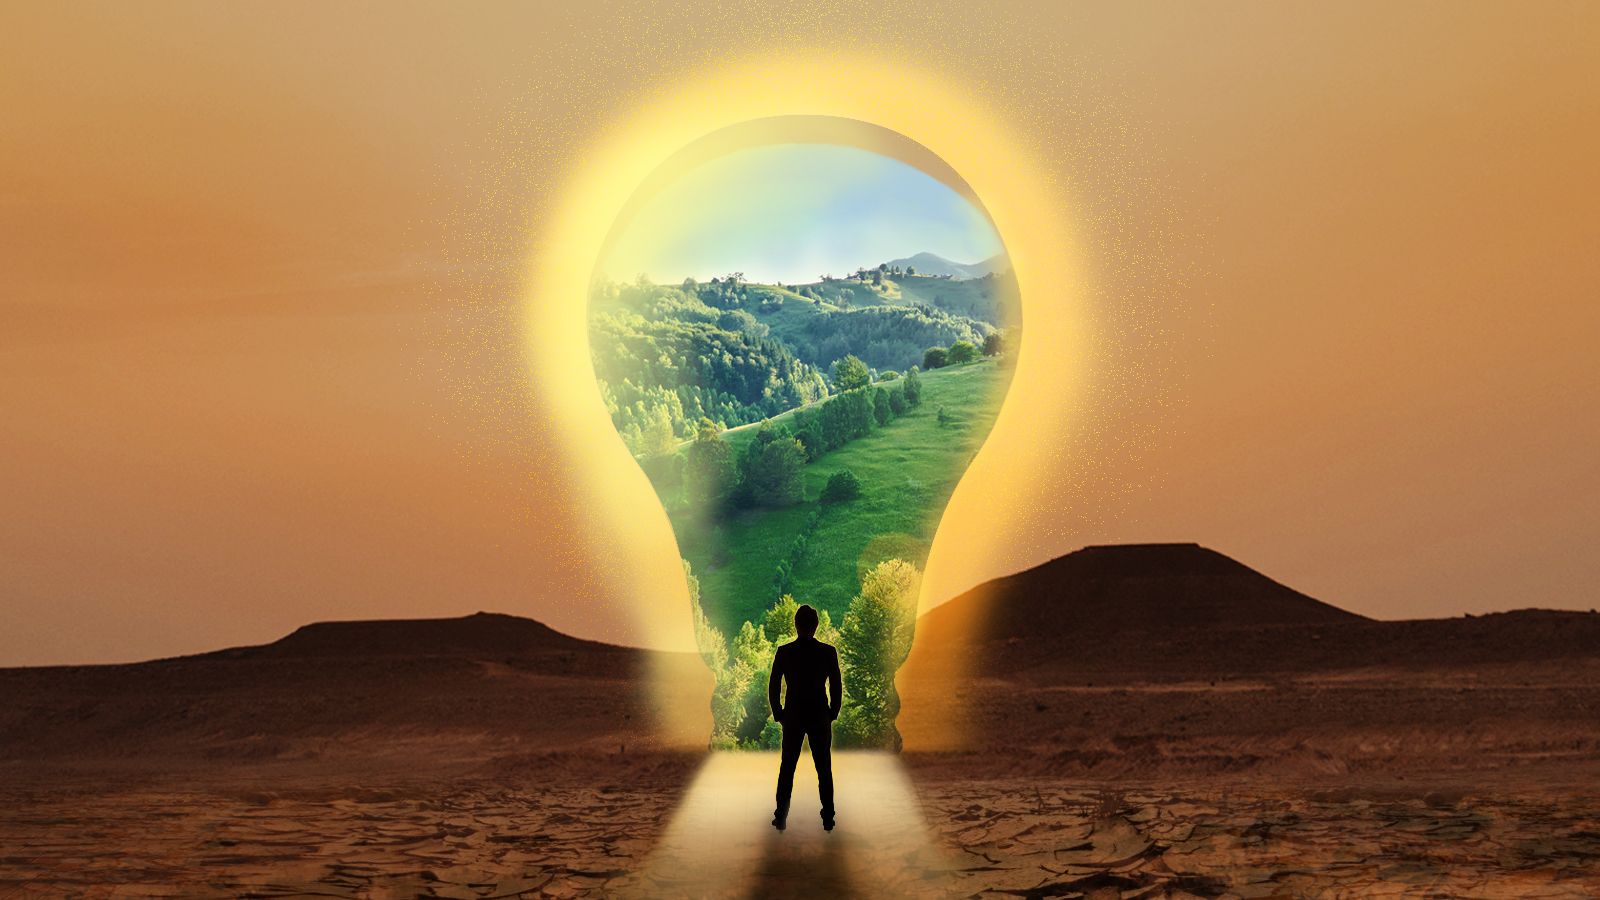 An abstract image, a person is looking at the light bulb and the light bulb symbolizes the culture of Innovation